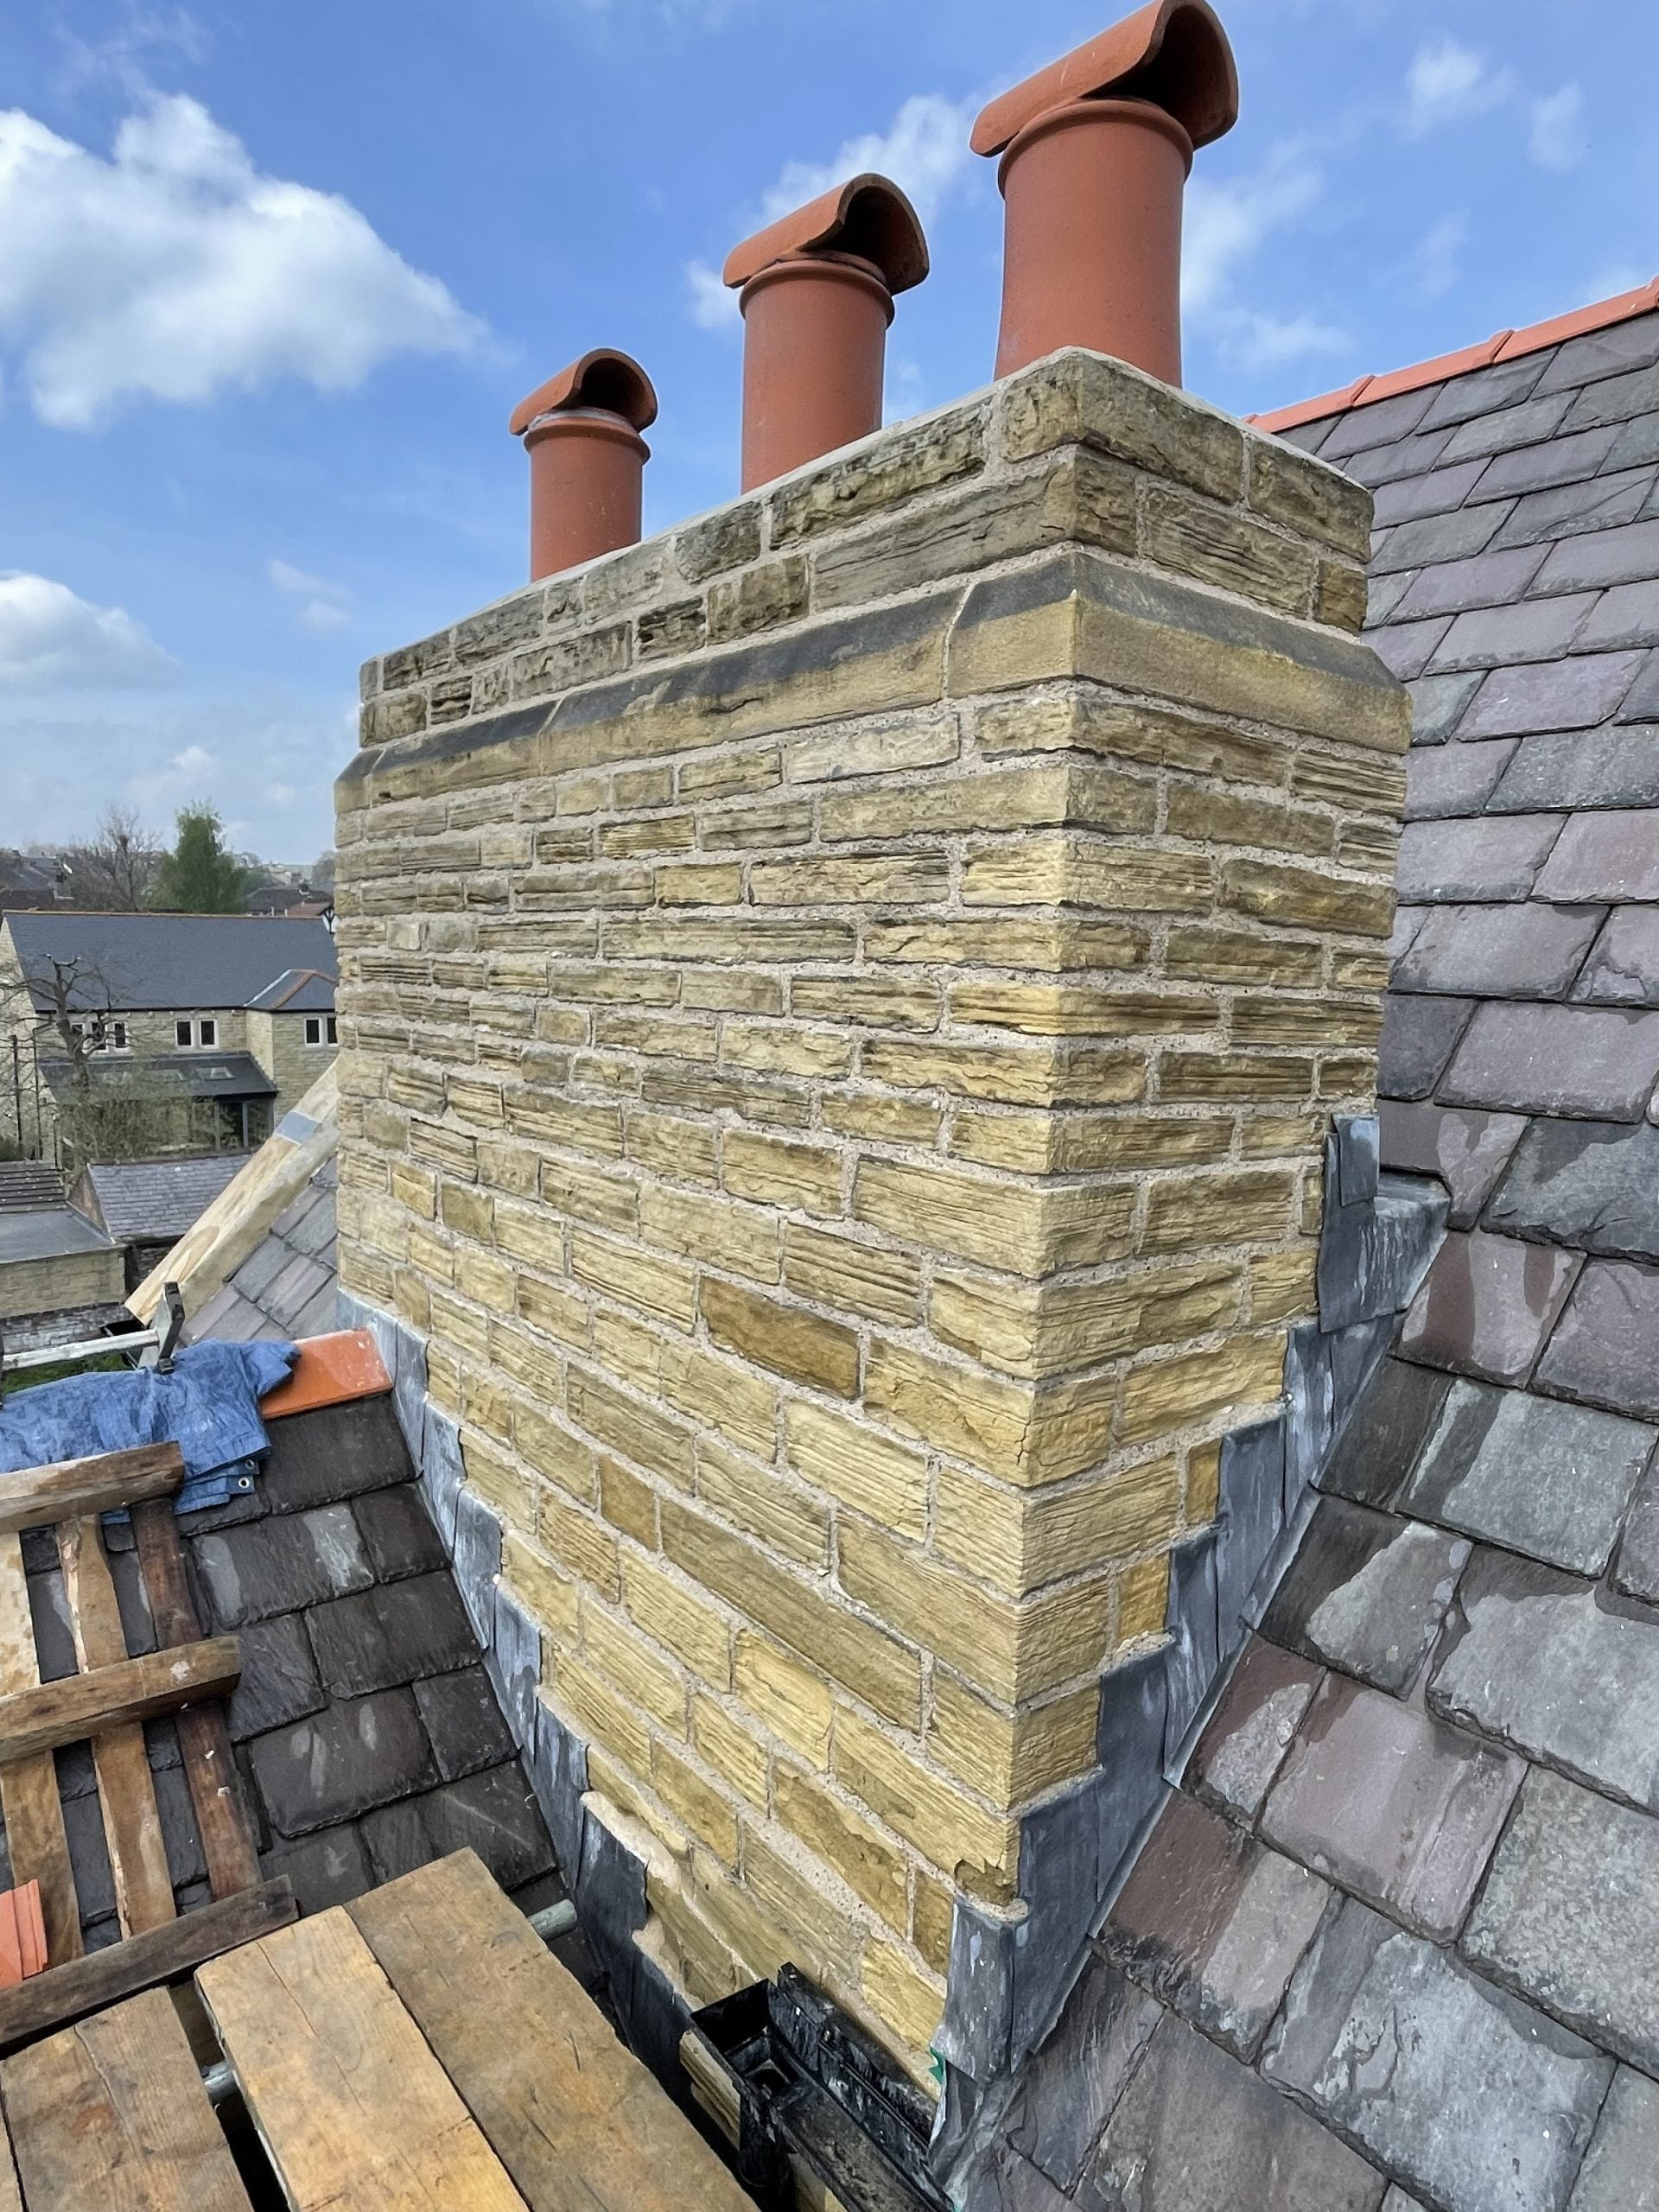 Traditional chimney repair. Re-pointing a grade 2 listed stone chimney using hot lime mortar in Huddersfield